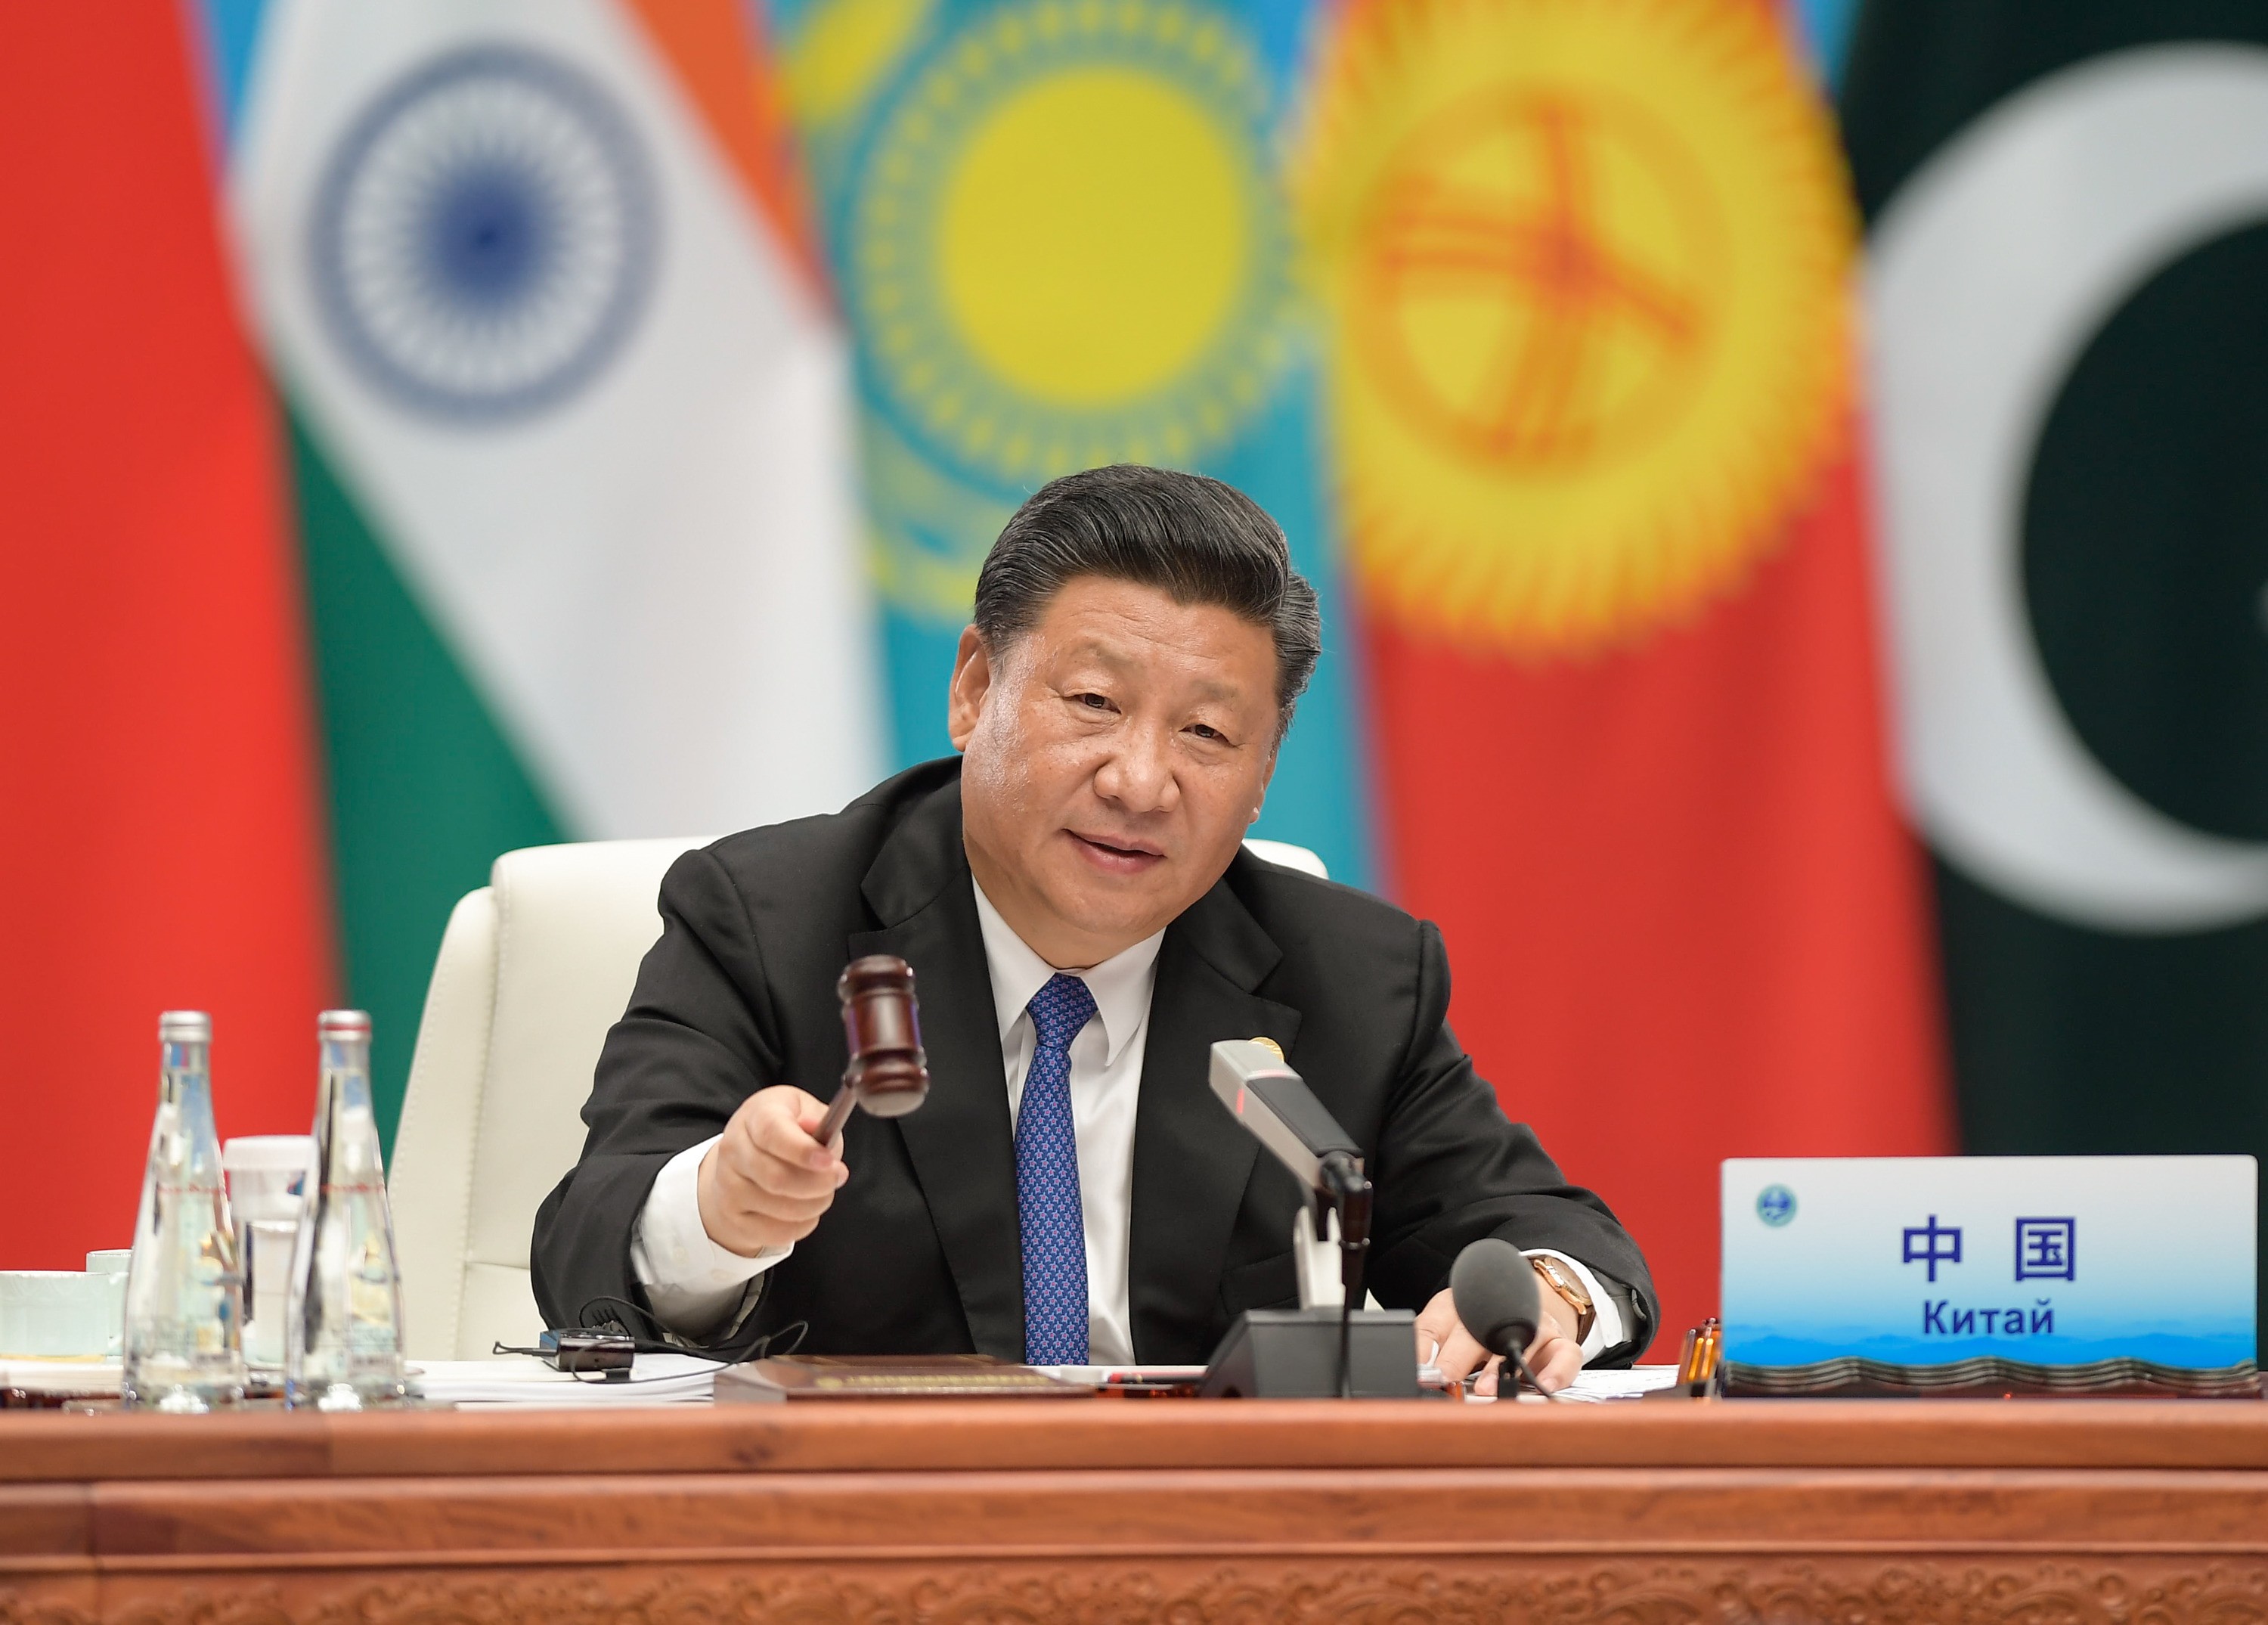 Chinese President Xi Jinping chairs the 18th Meeting of the Council of Heads of Member States of the Shanghai Cooperation Organisation in Qingdao on June 10. Photo: Xinhua